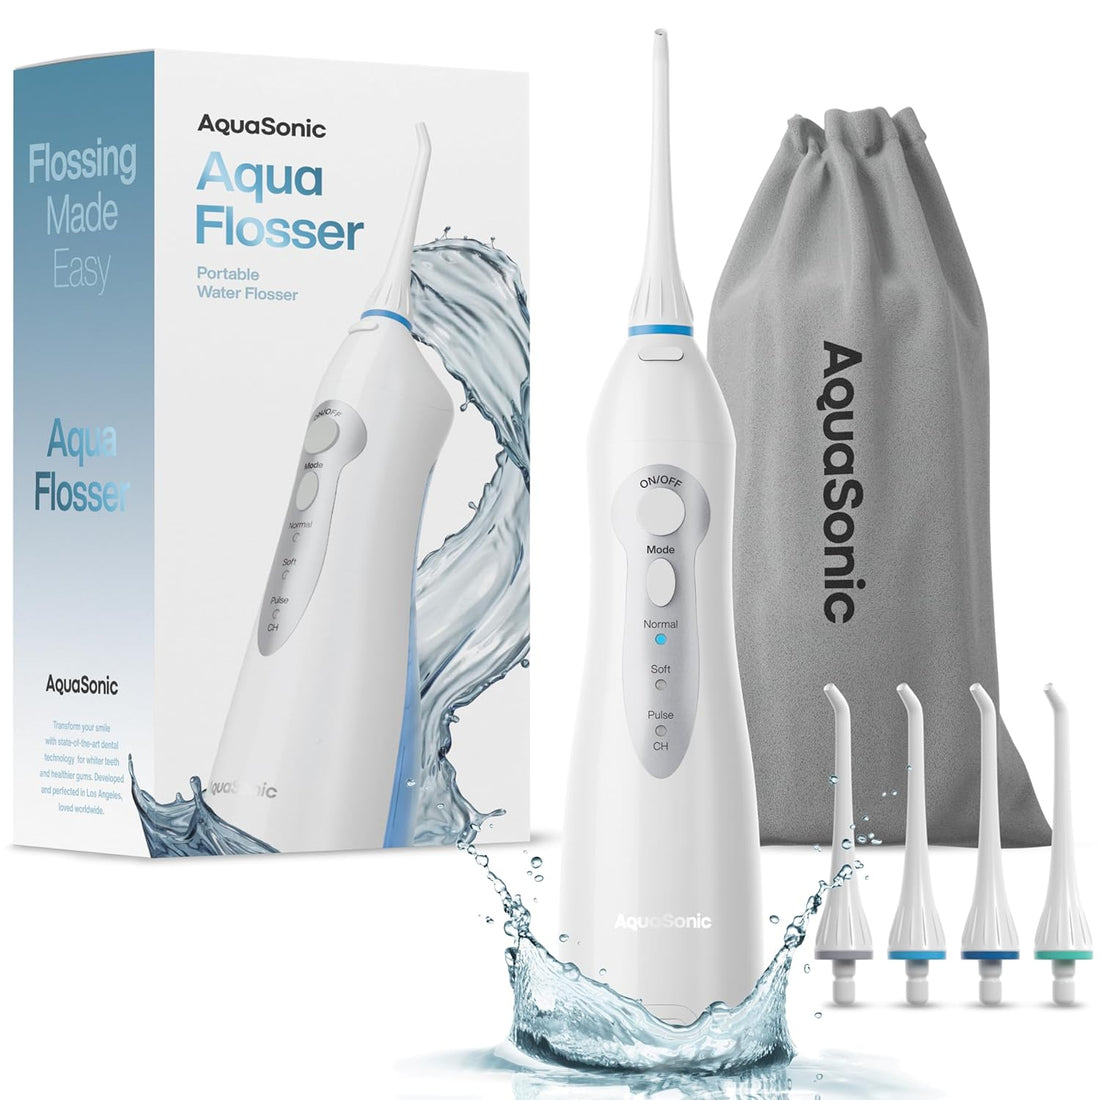 Aqua Flosser - Professional Rechargeable Oral Irrigator With 4 Tips And 4 Dental Tools - Water Flosser W/ 3 Modes - Portable Cordless - Ideal For Kids And Braces - Dentist Recommended - Fda Approved